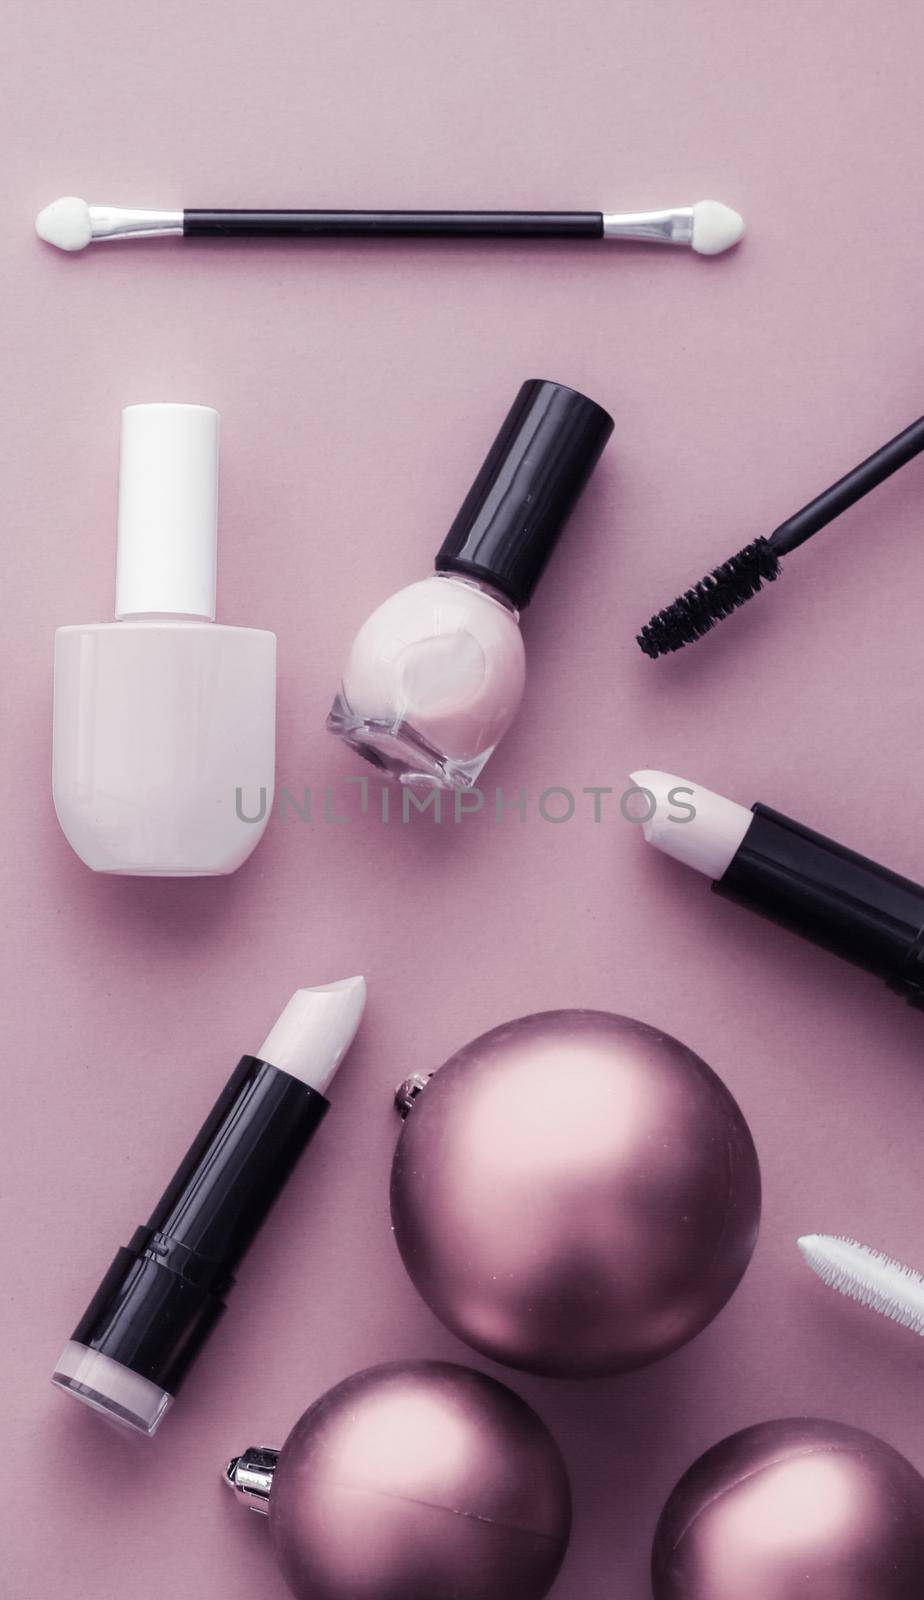 Cosmetic branding, fashion blog cover and girly glamour concept - Make-up and cosmetics product set for beauty brand Christmas sale promotion, luxury purple flatlay background as holiday design